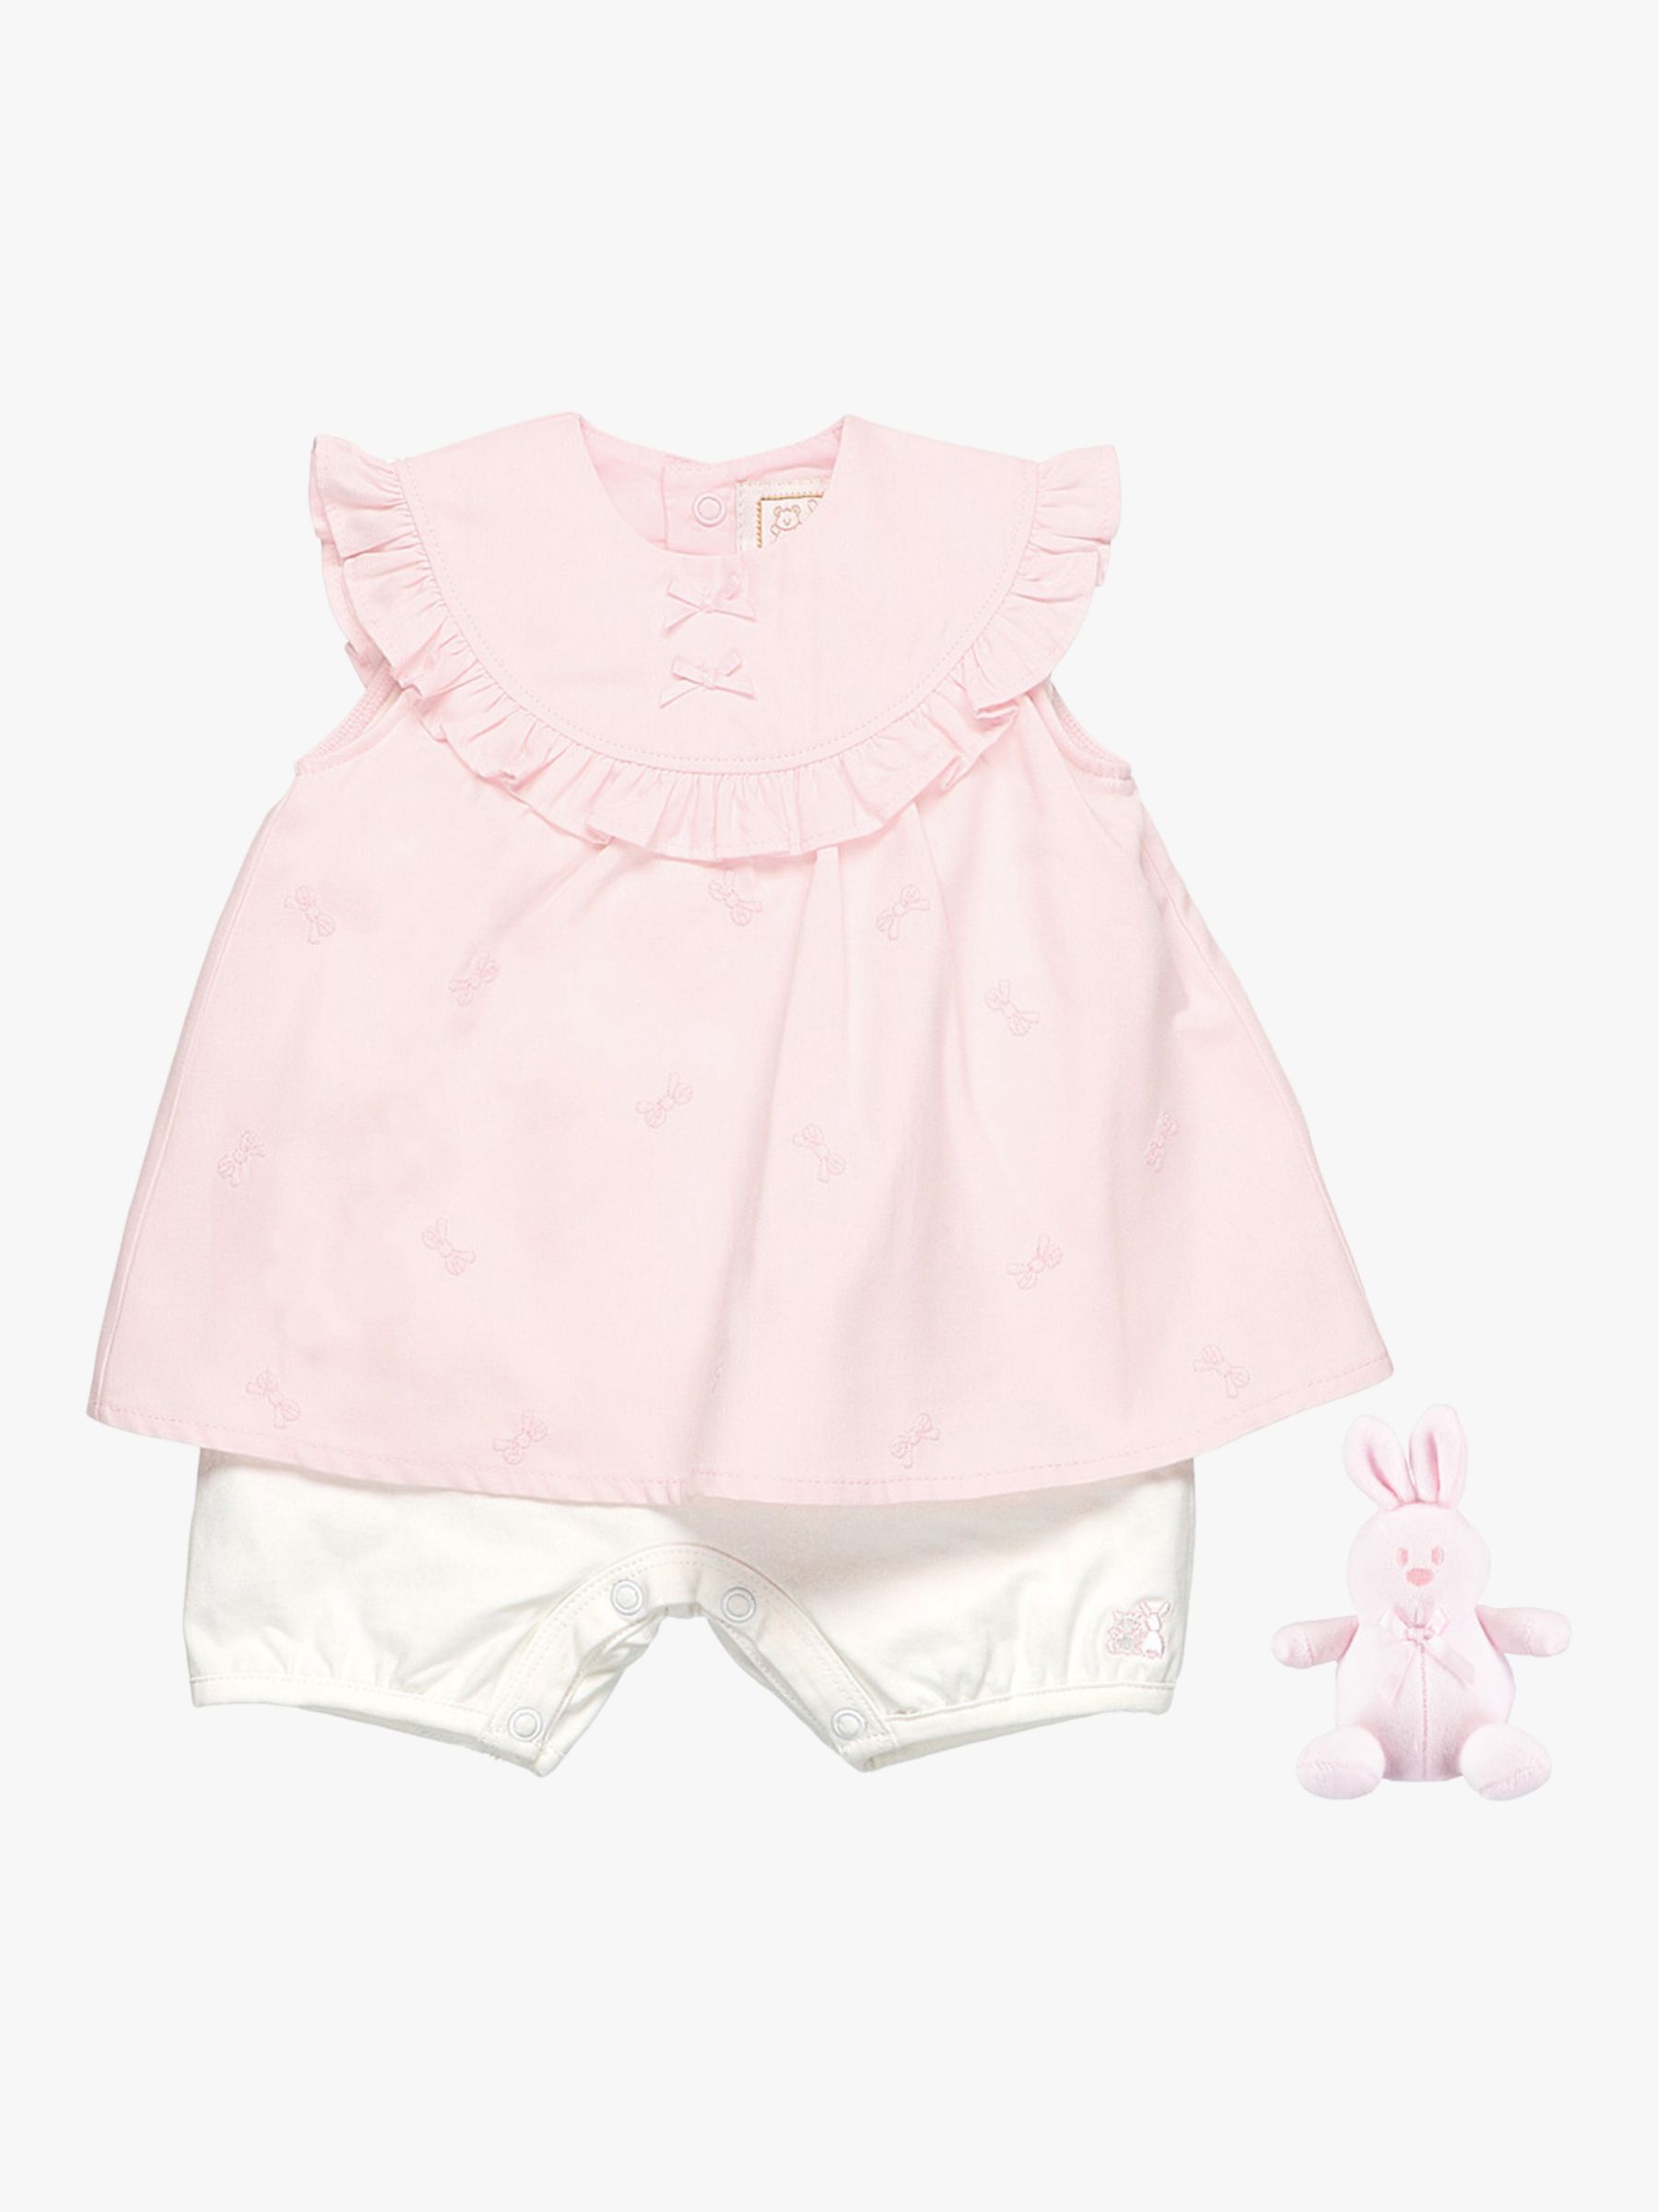 1 month baby dress online shopping